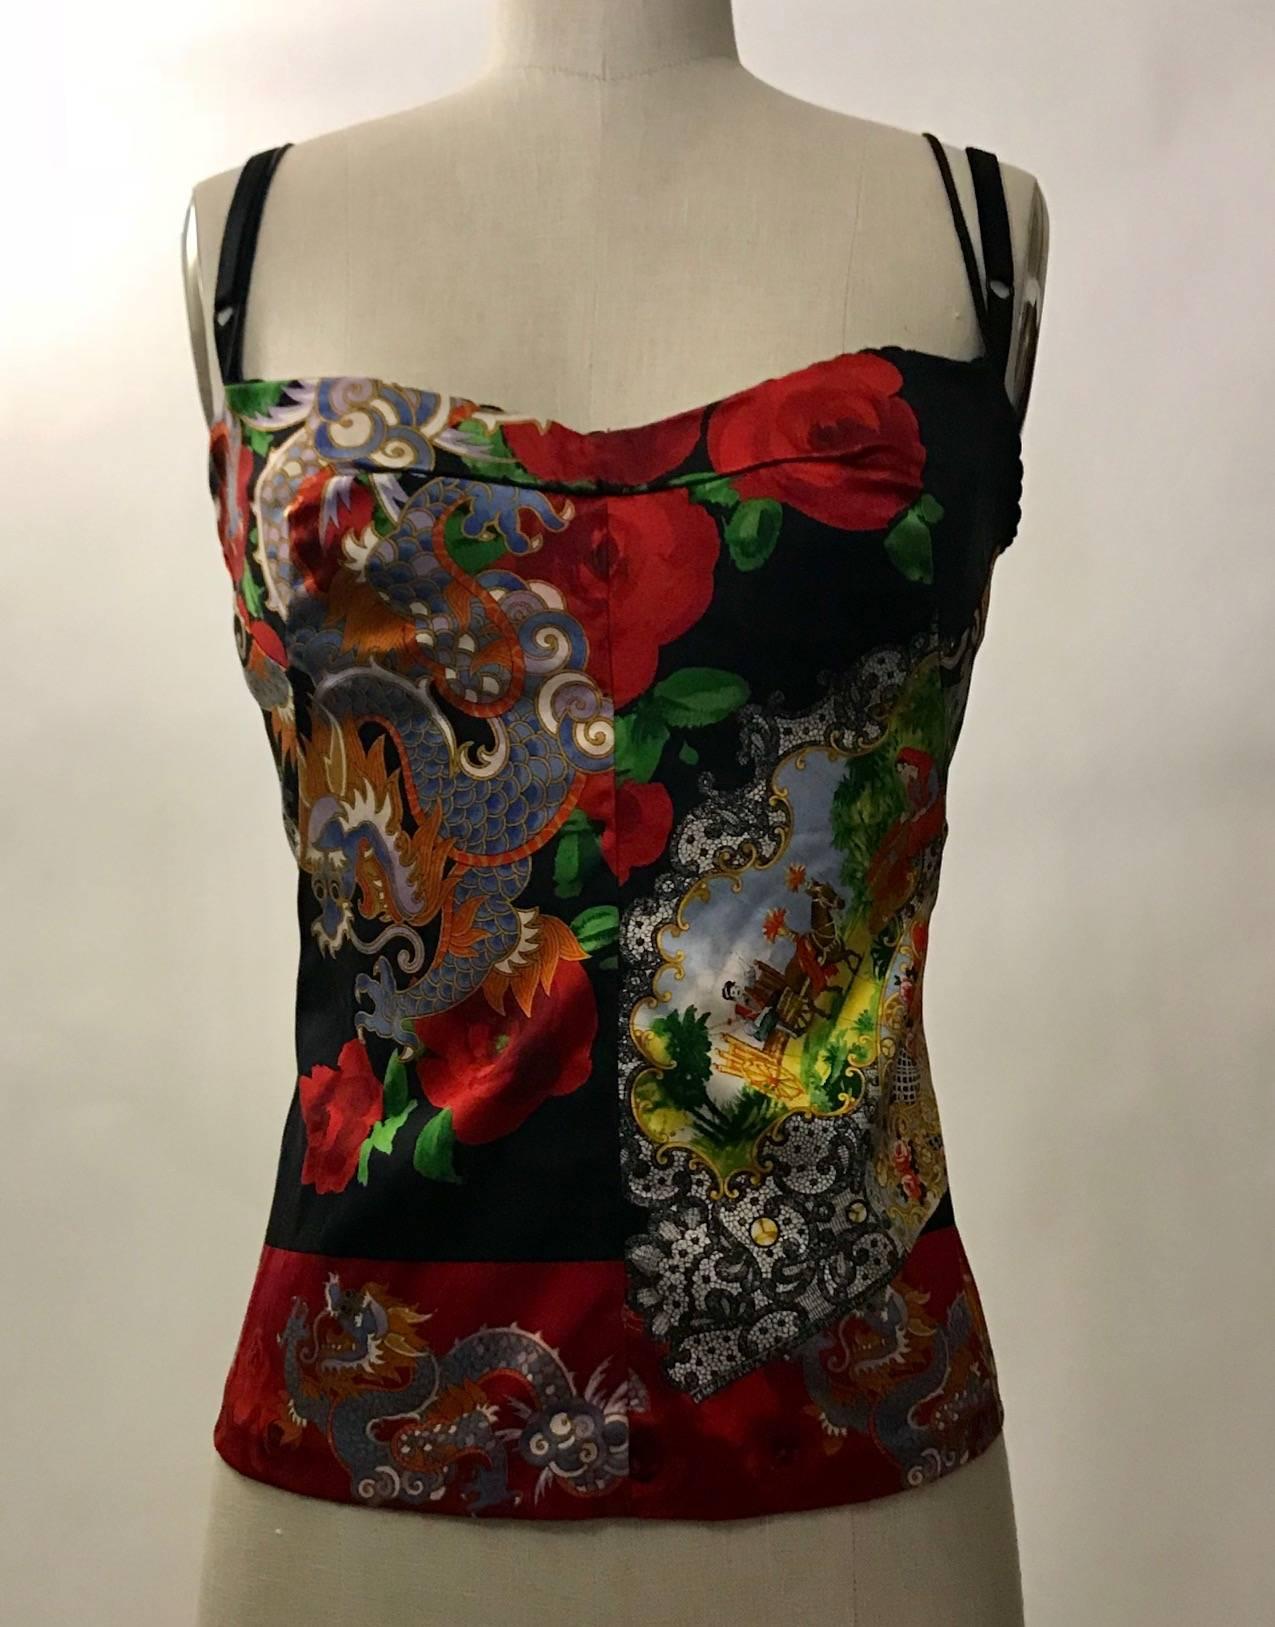 Dolce & Gabbana red top featuring dragon and rose print. Built in mesh bralette with scalloped edging at top (straps meant to be exposed.) Fastens along back with hook and eye closures.

Silk/stretch blend.

Made in Italy.

Size IT 44, approximate